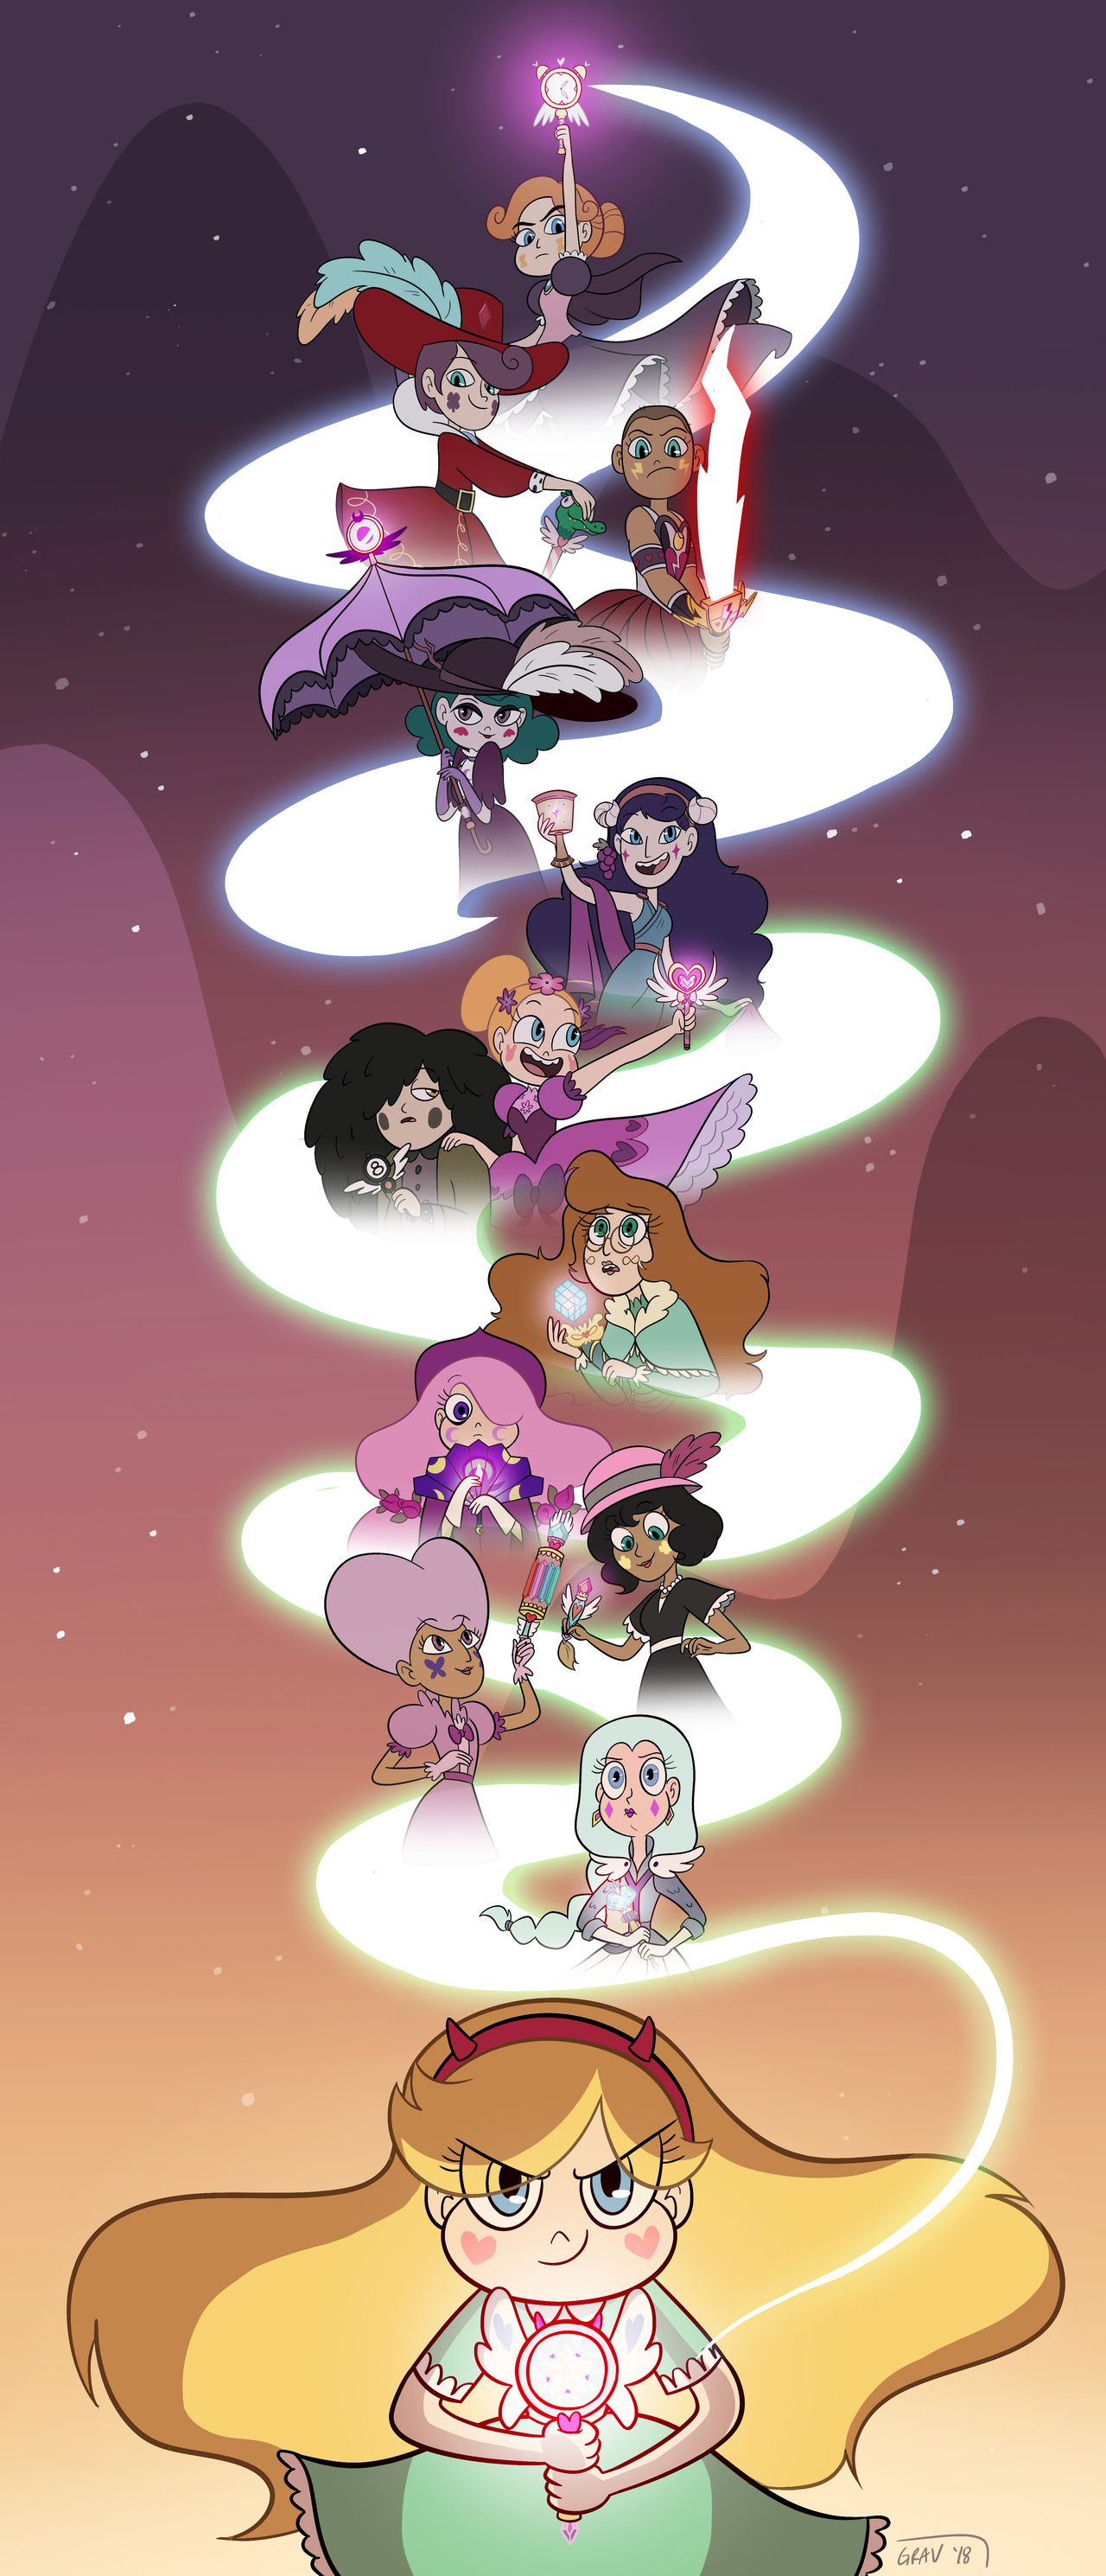 Disney Star Vs. The Forces Of Evil Wallpapers Wallpaper Cave